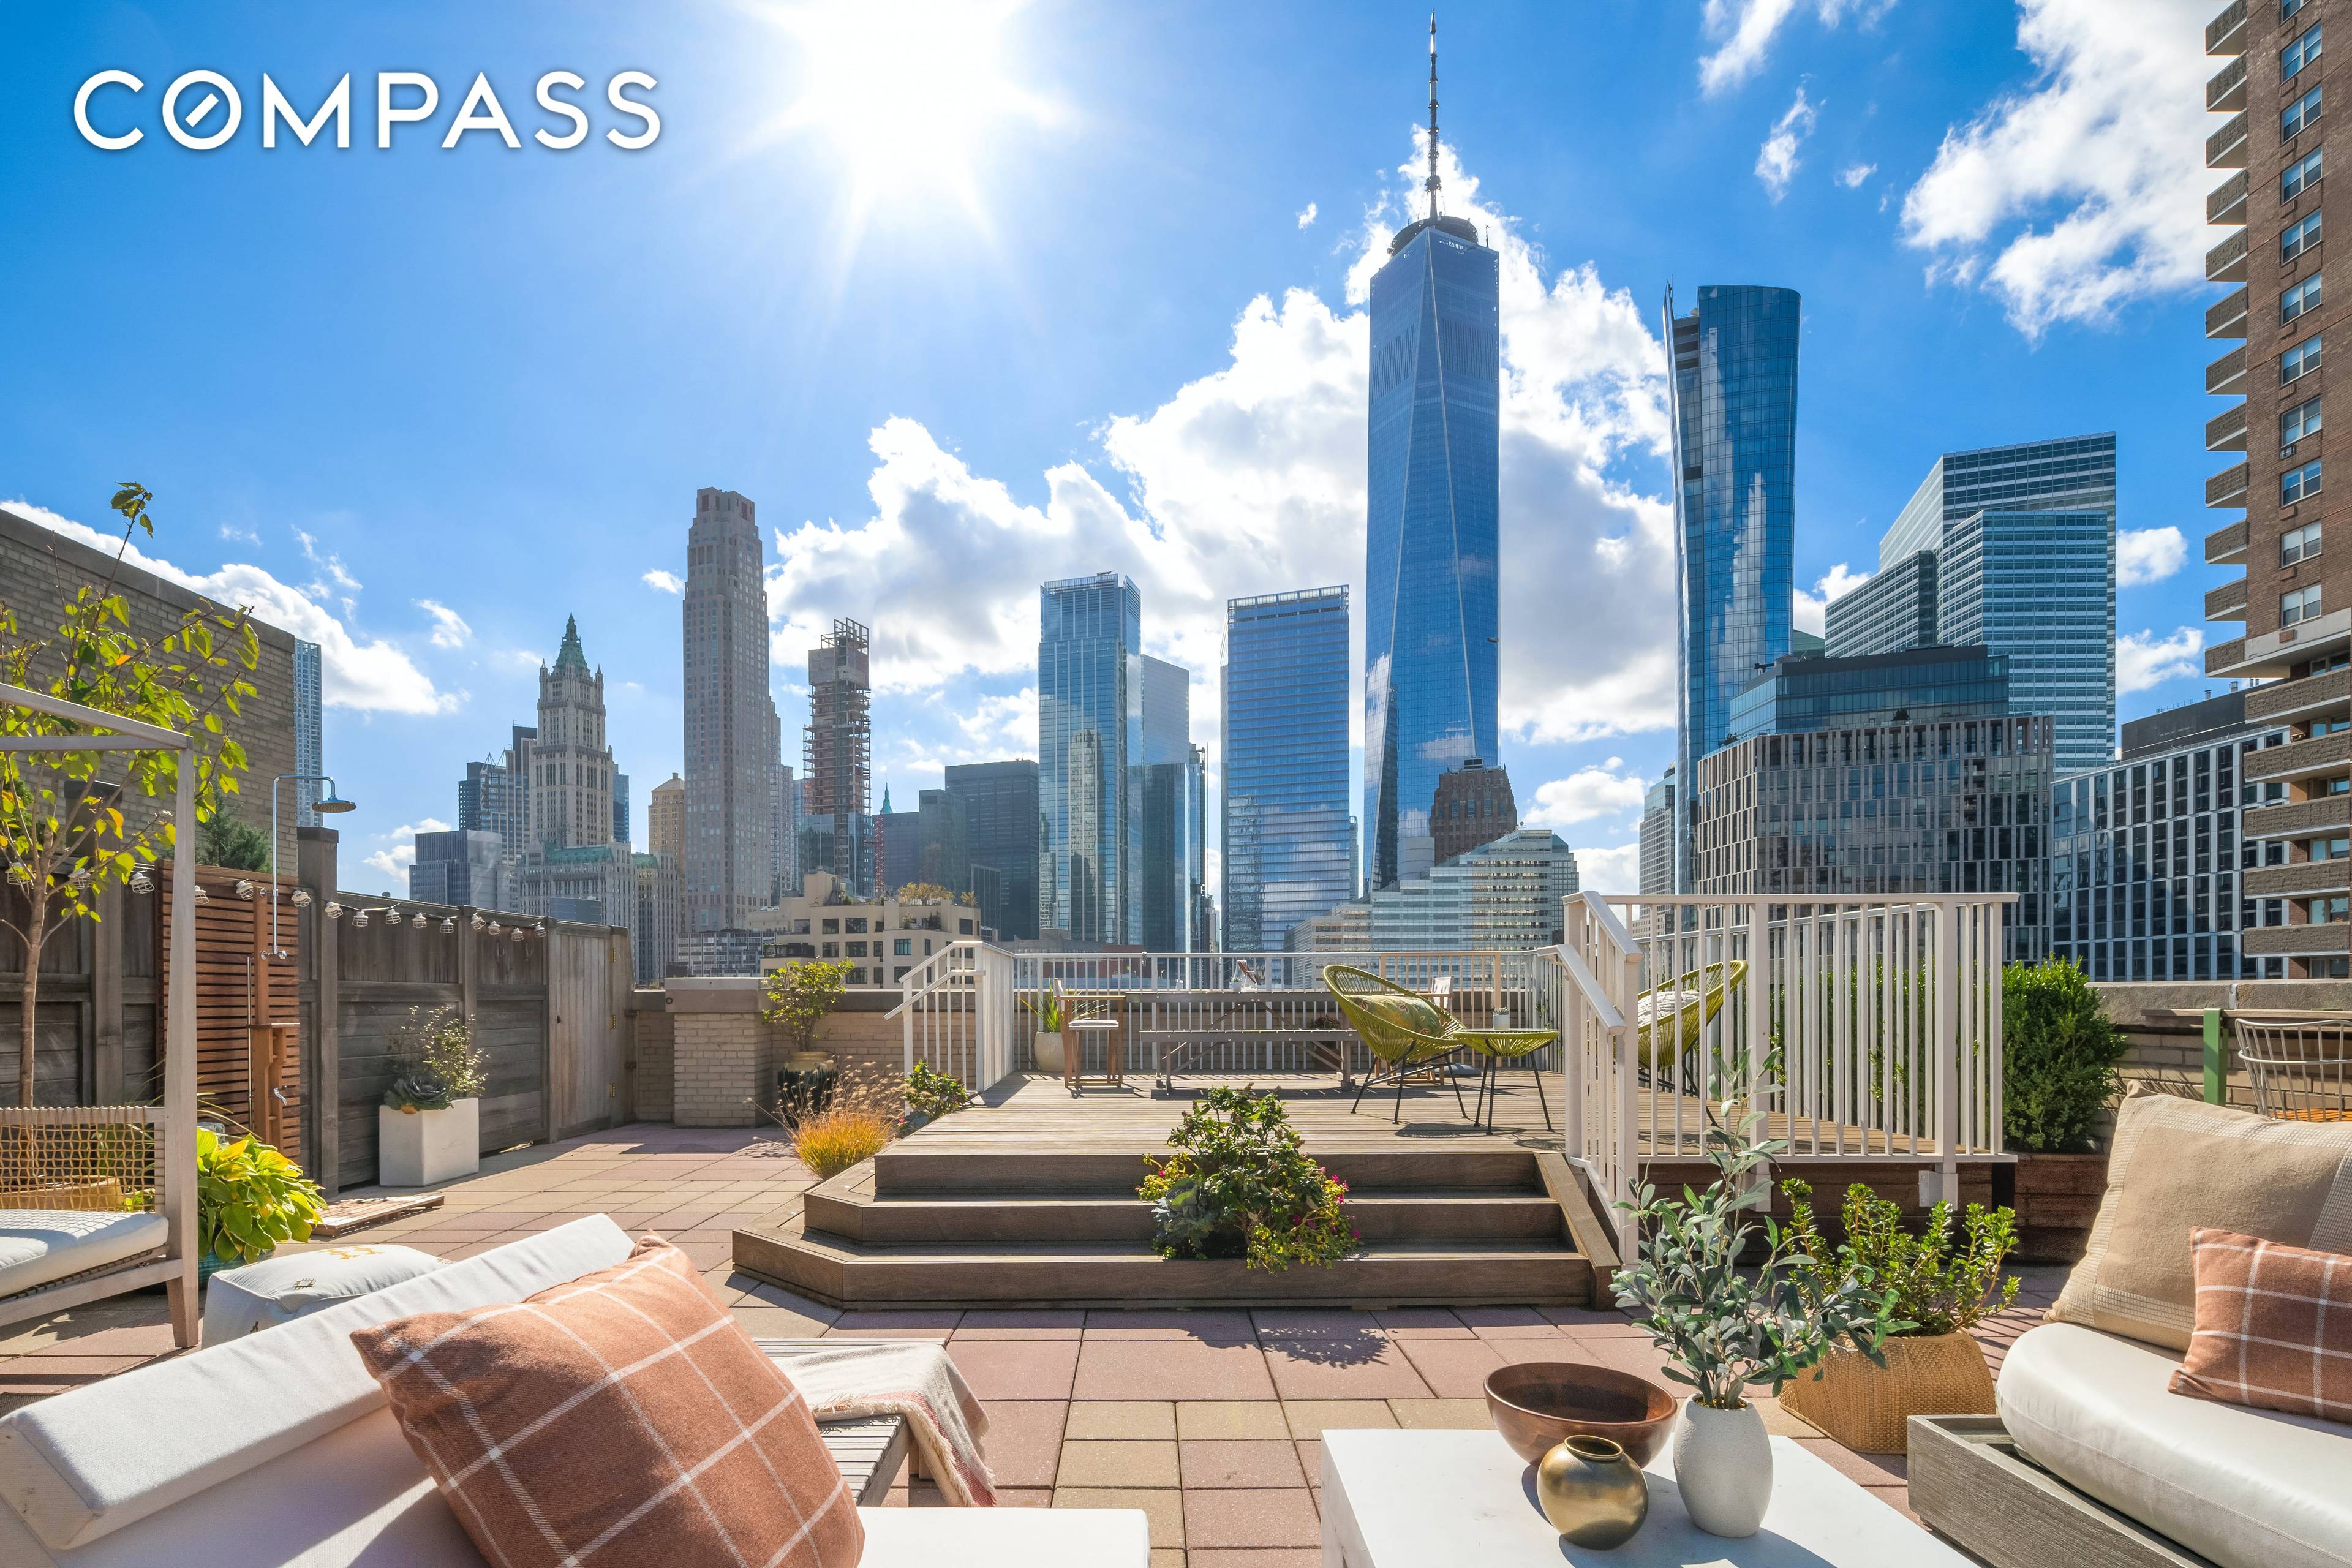 Rare penthouse with a 1, 200 square foot private rooftop terrace overlooking the Hudson River and located in the heart of TriBeCa West.